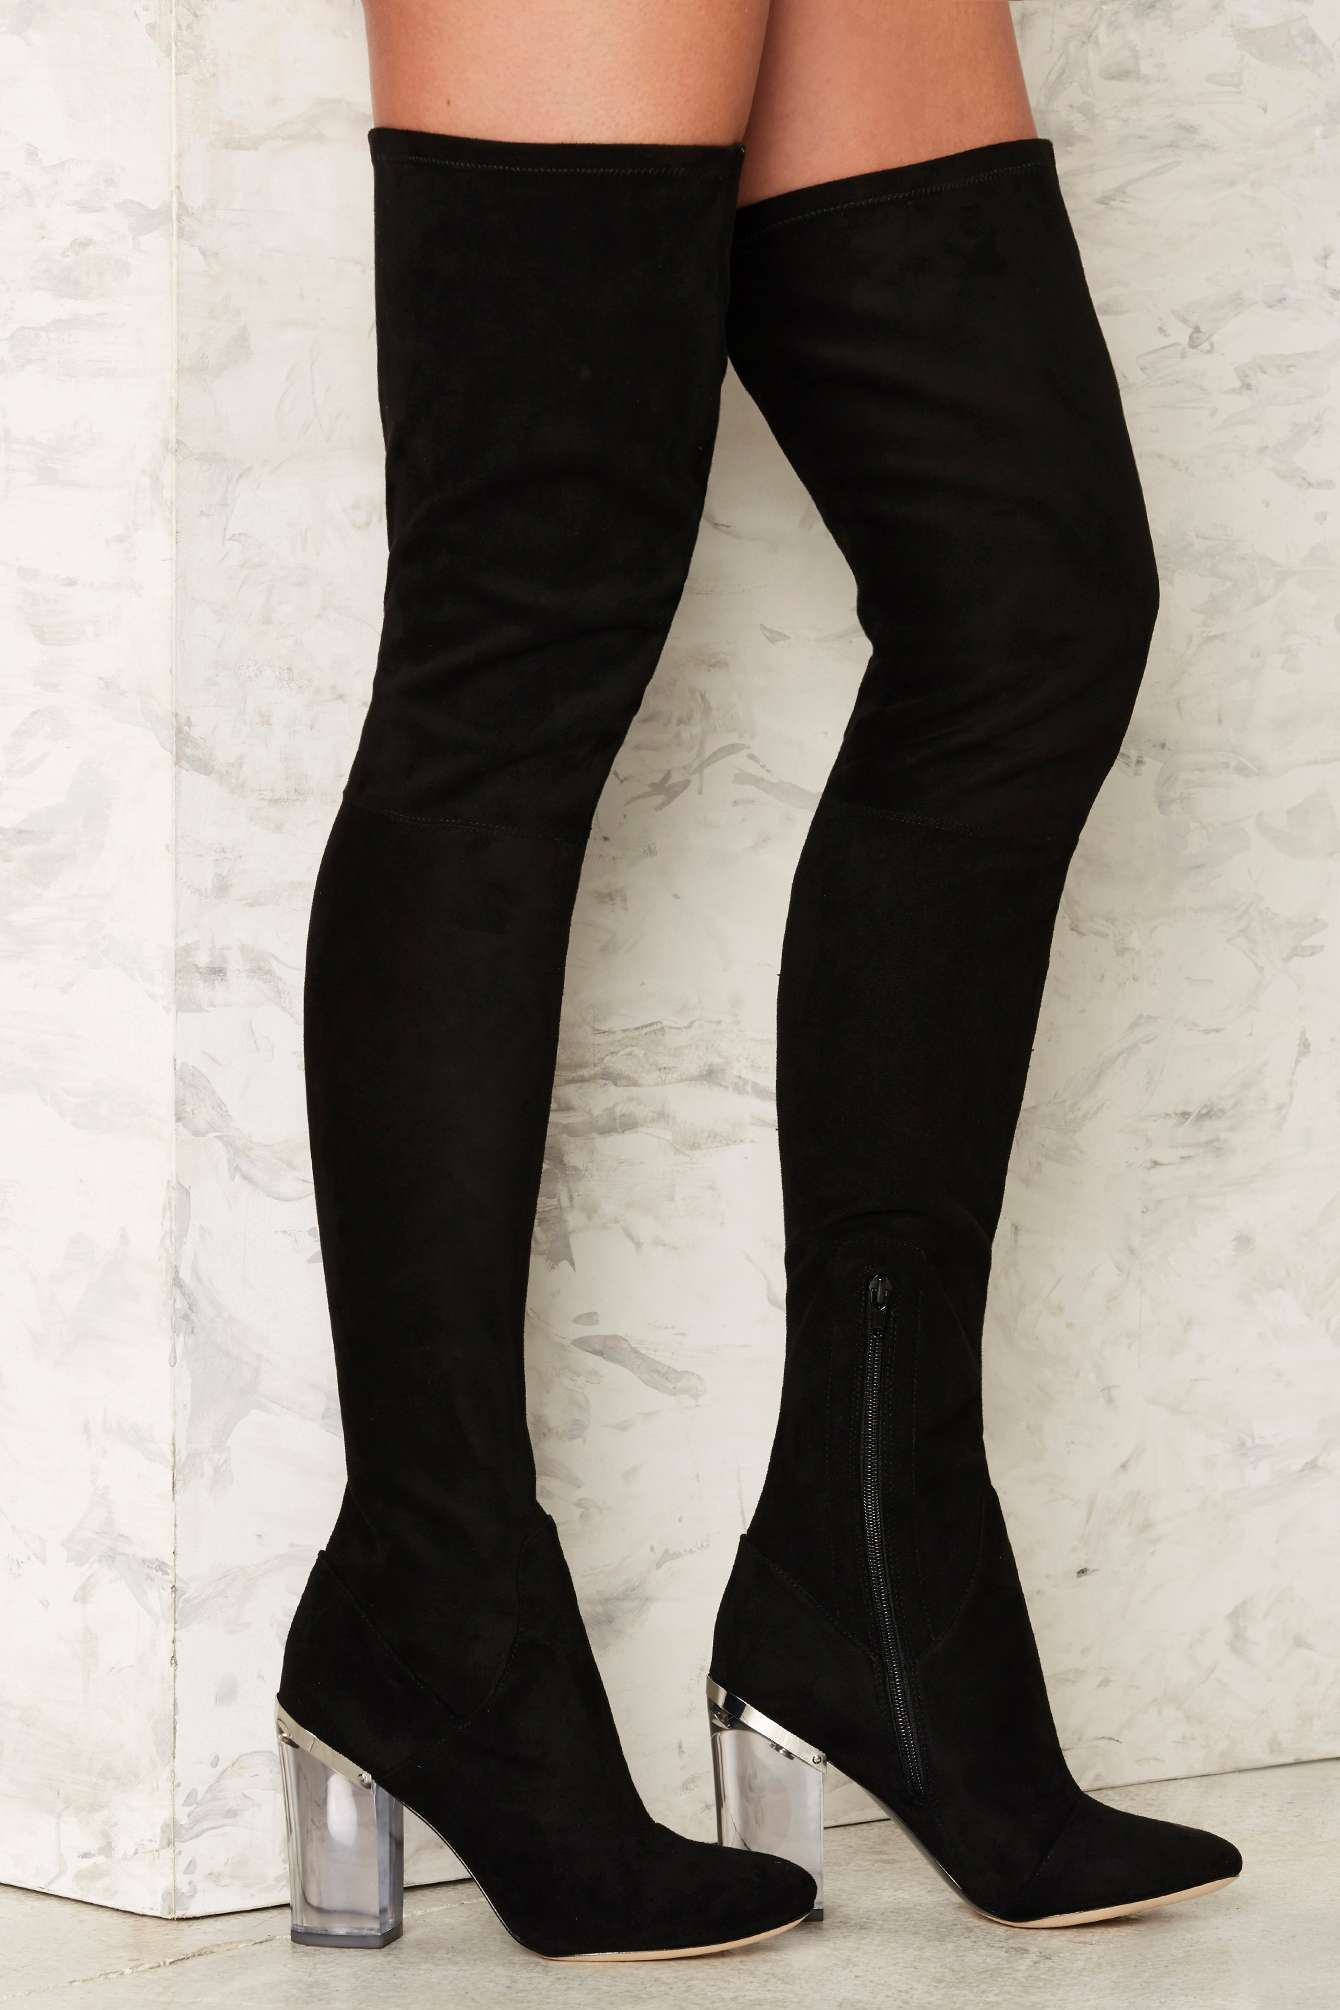 11 Fabulous Stretch Boots That Will Work For All Shapes and Sizes
